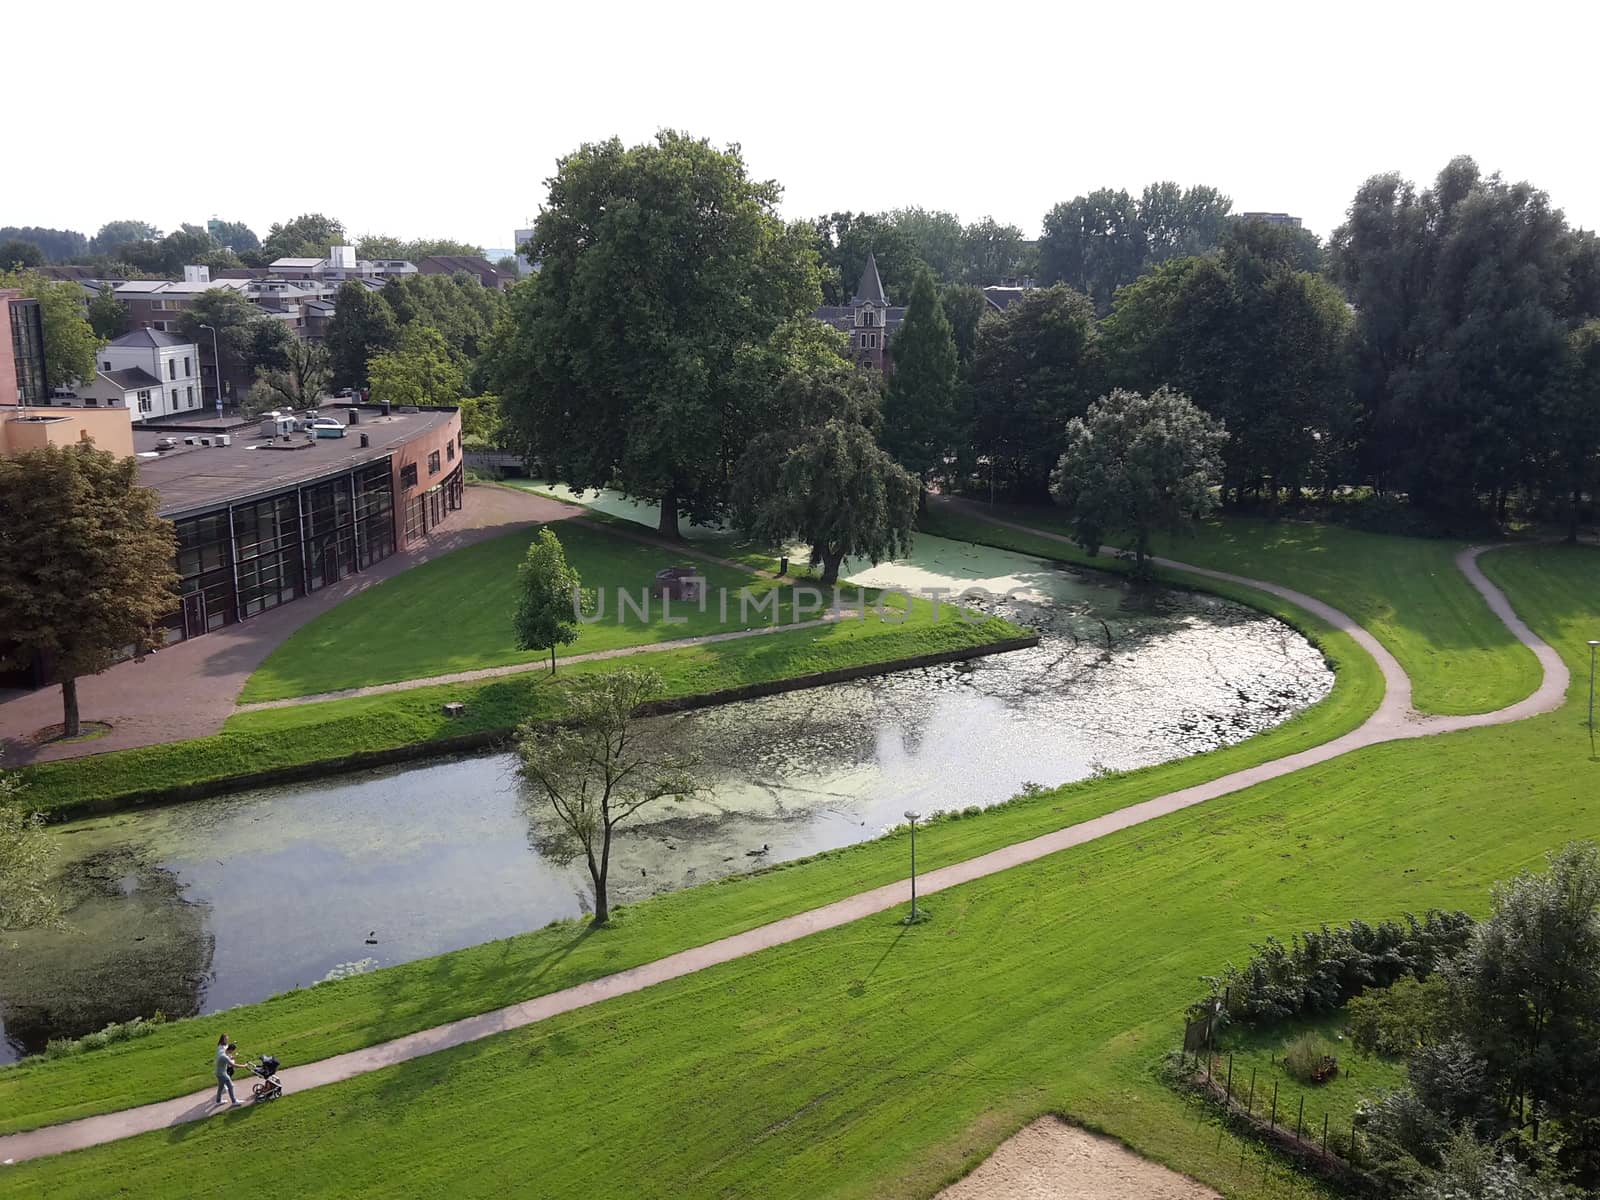 View of Ede-Wageningen, beautiful city in the Netherlands with an important university campus by matteobartolini